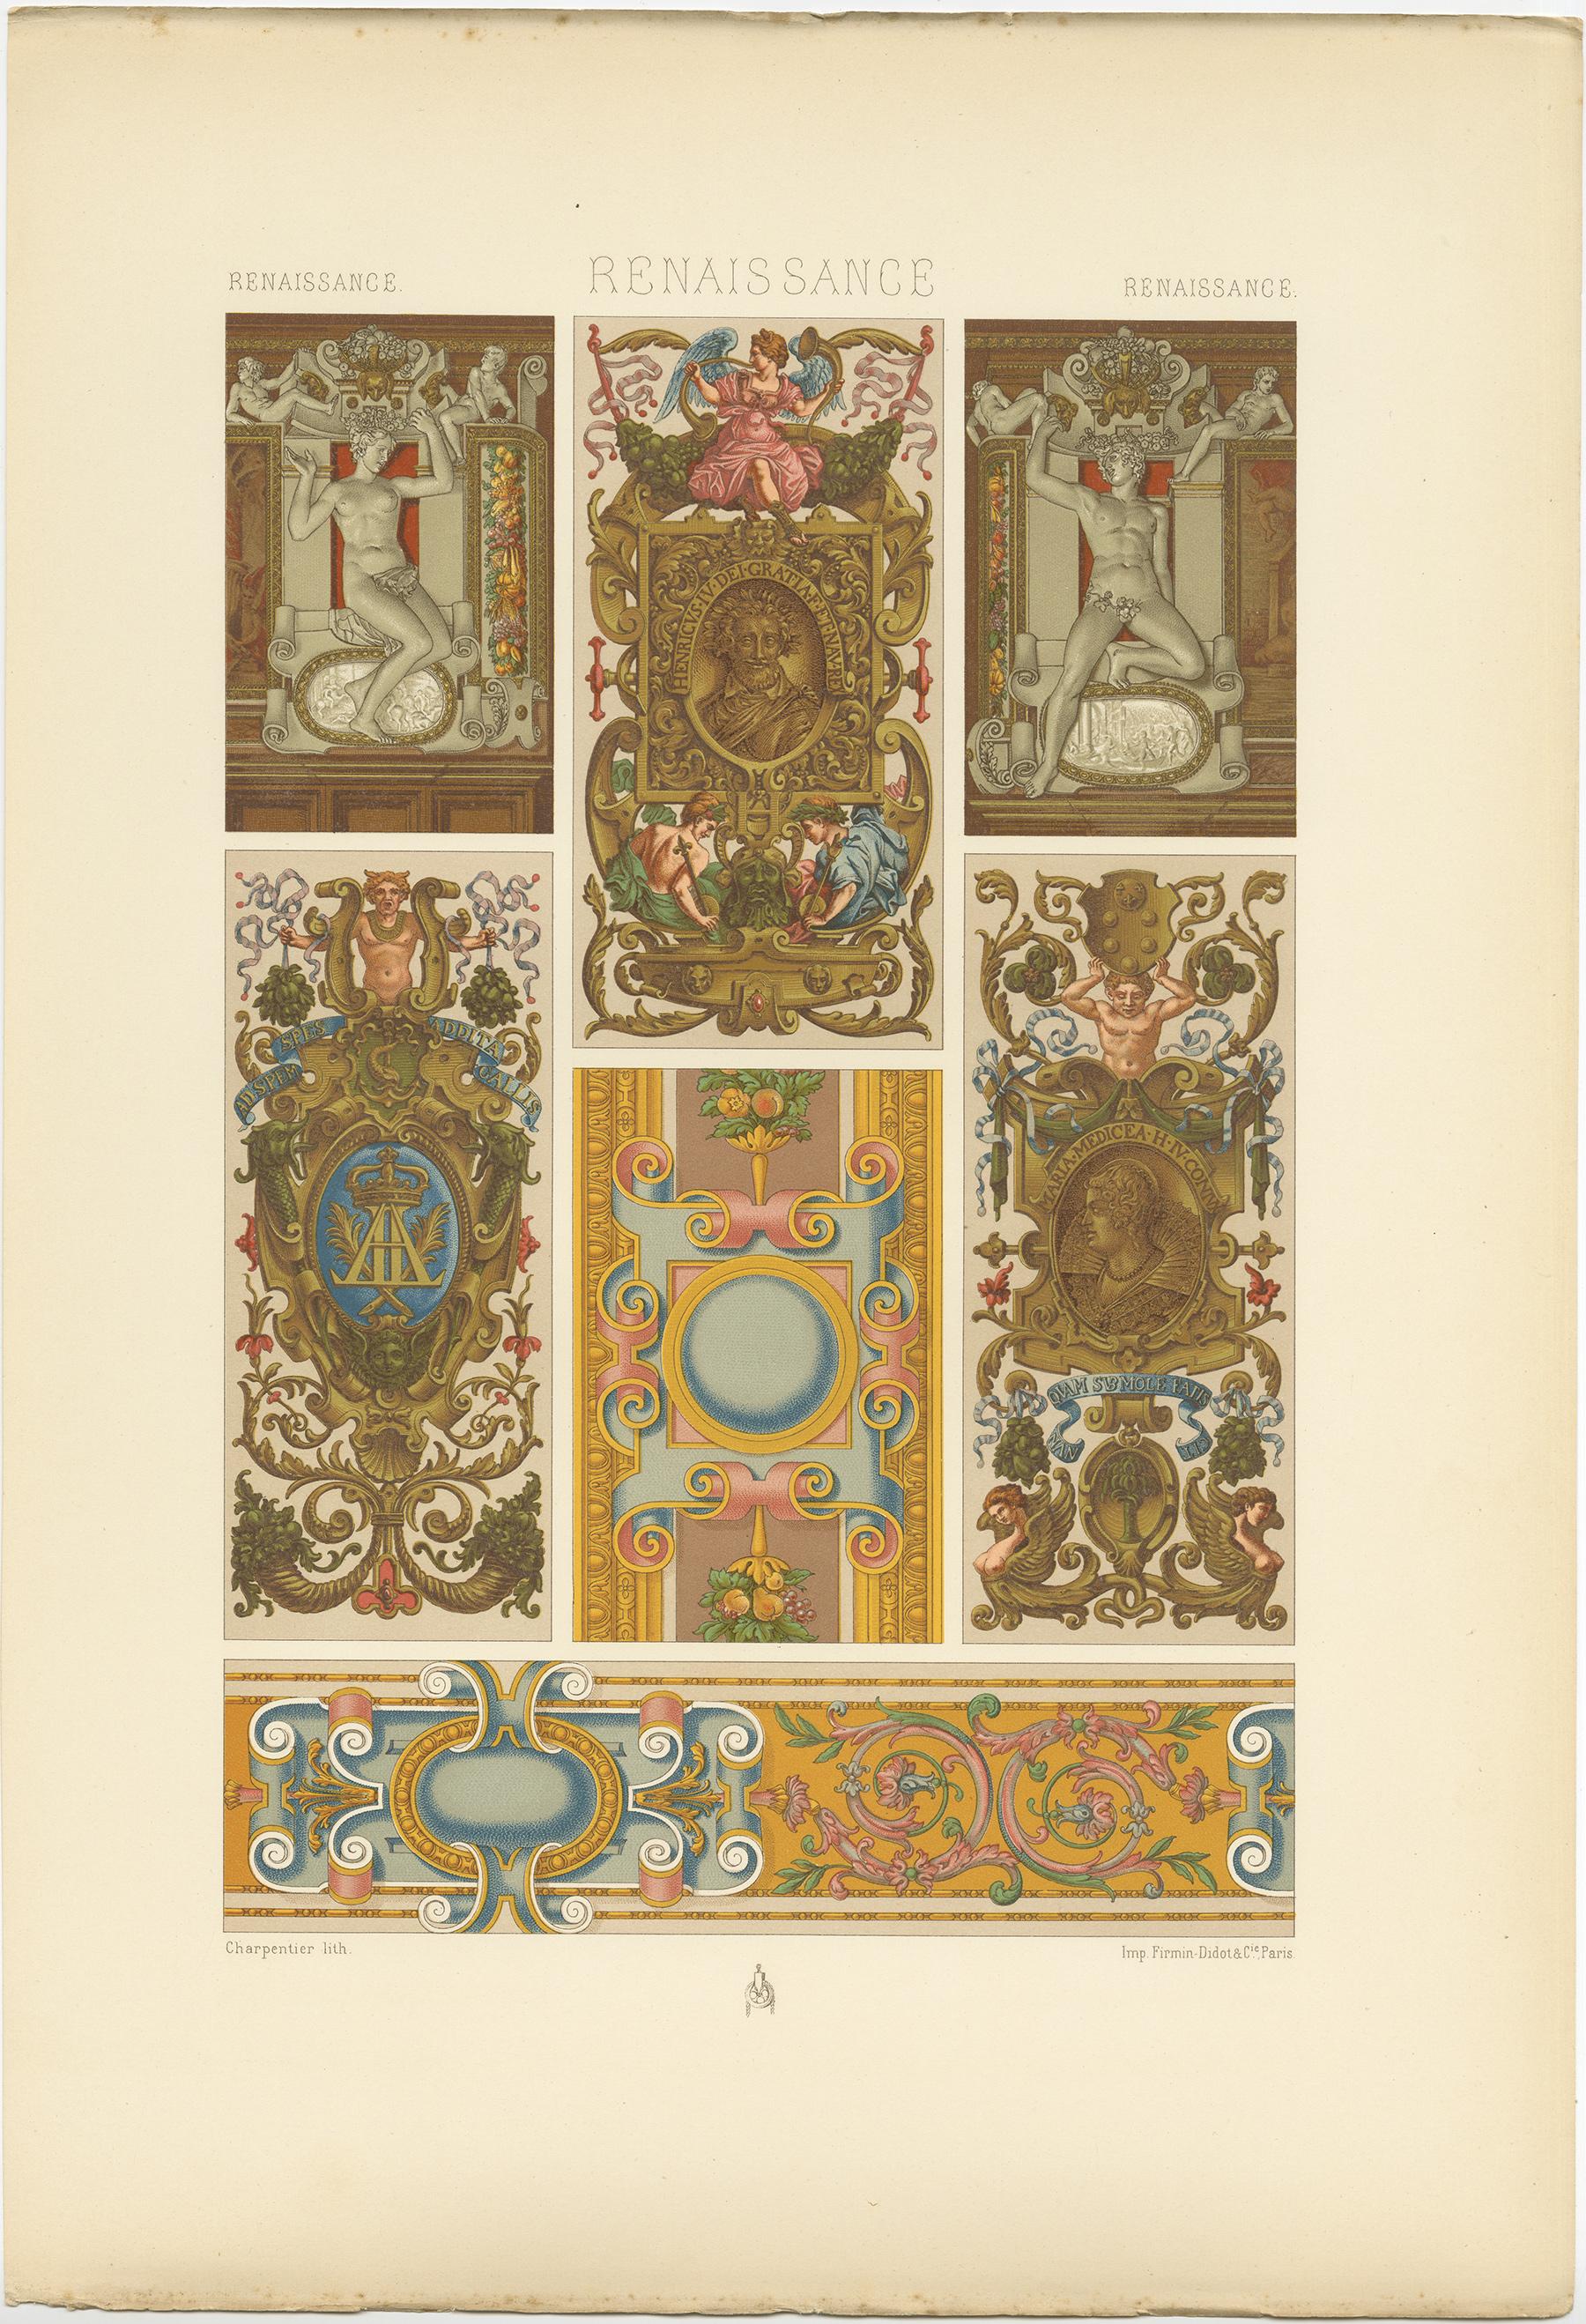 Antique print titled 'Renaissance - Renaissance - Renaissance'. Chromolithograph of 16th and 17th centuries cartouches from sculpture, painting and textiles, France ornaments. This print originates from 'l'Ornement Polychrome' by Auguste Racinet.